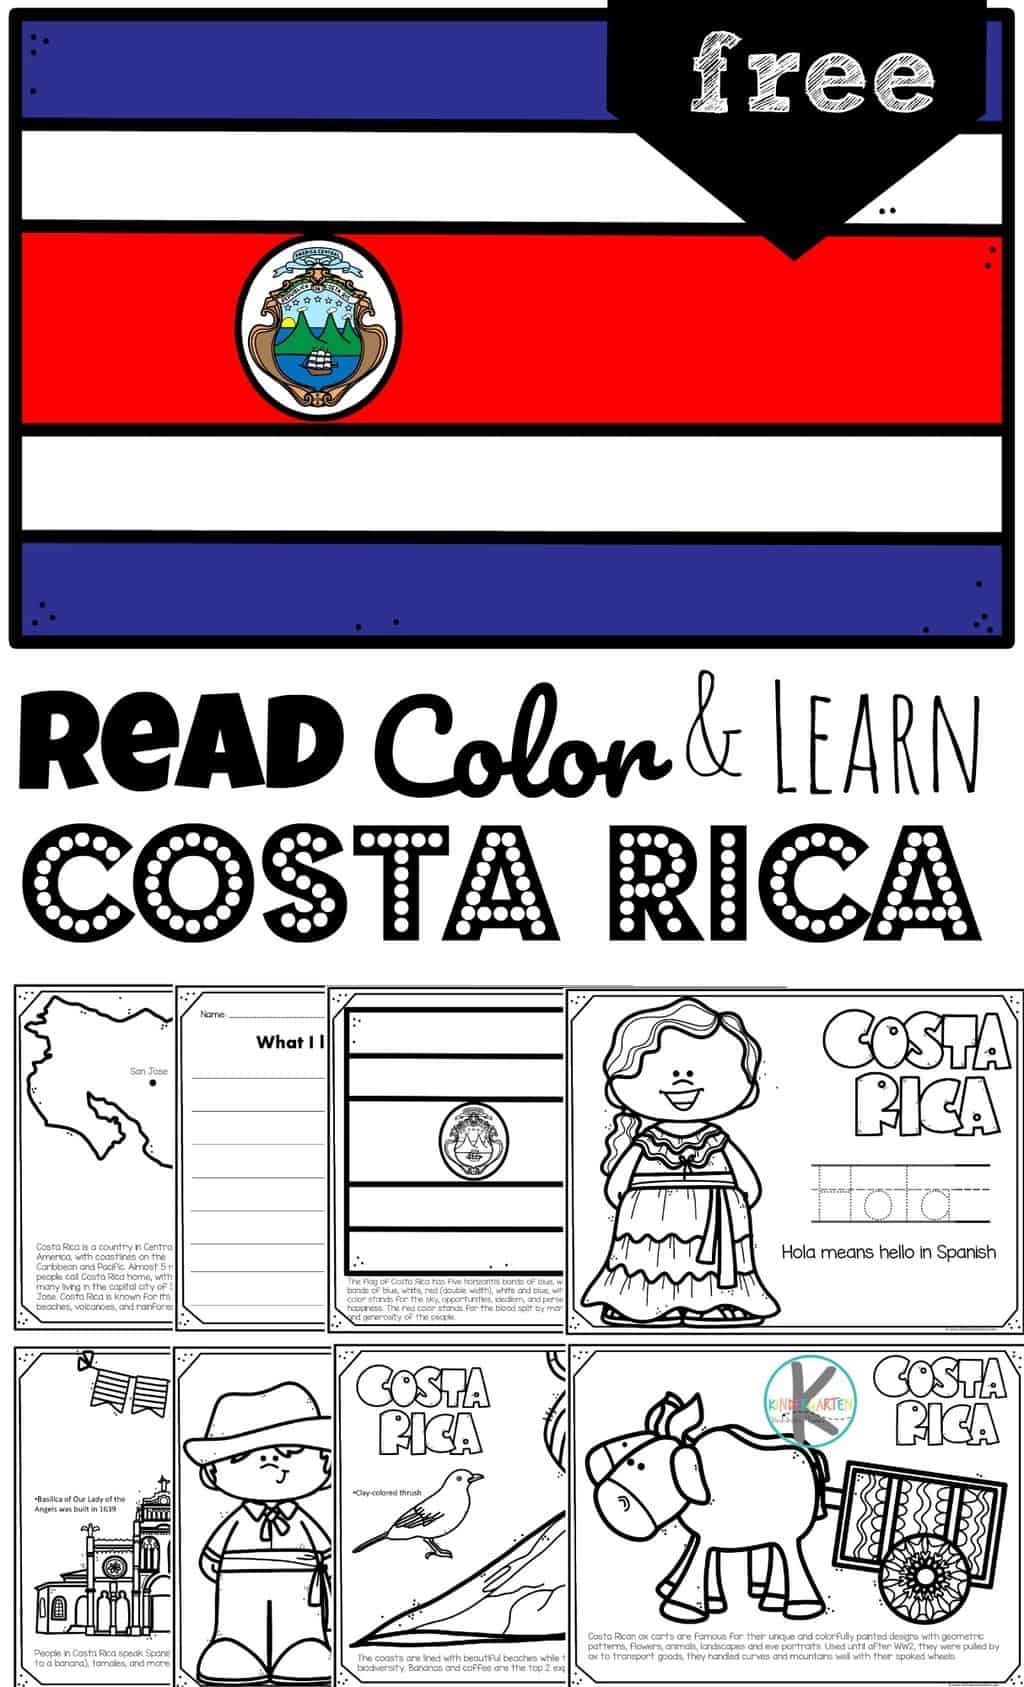 FREE Costa Rica Coloring Pages Read Color And Learn